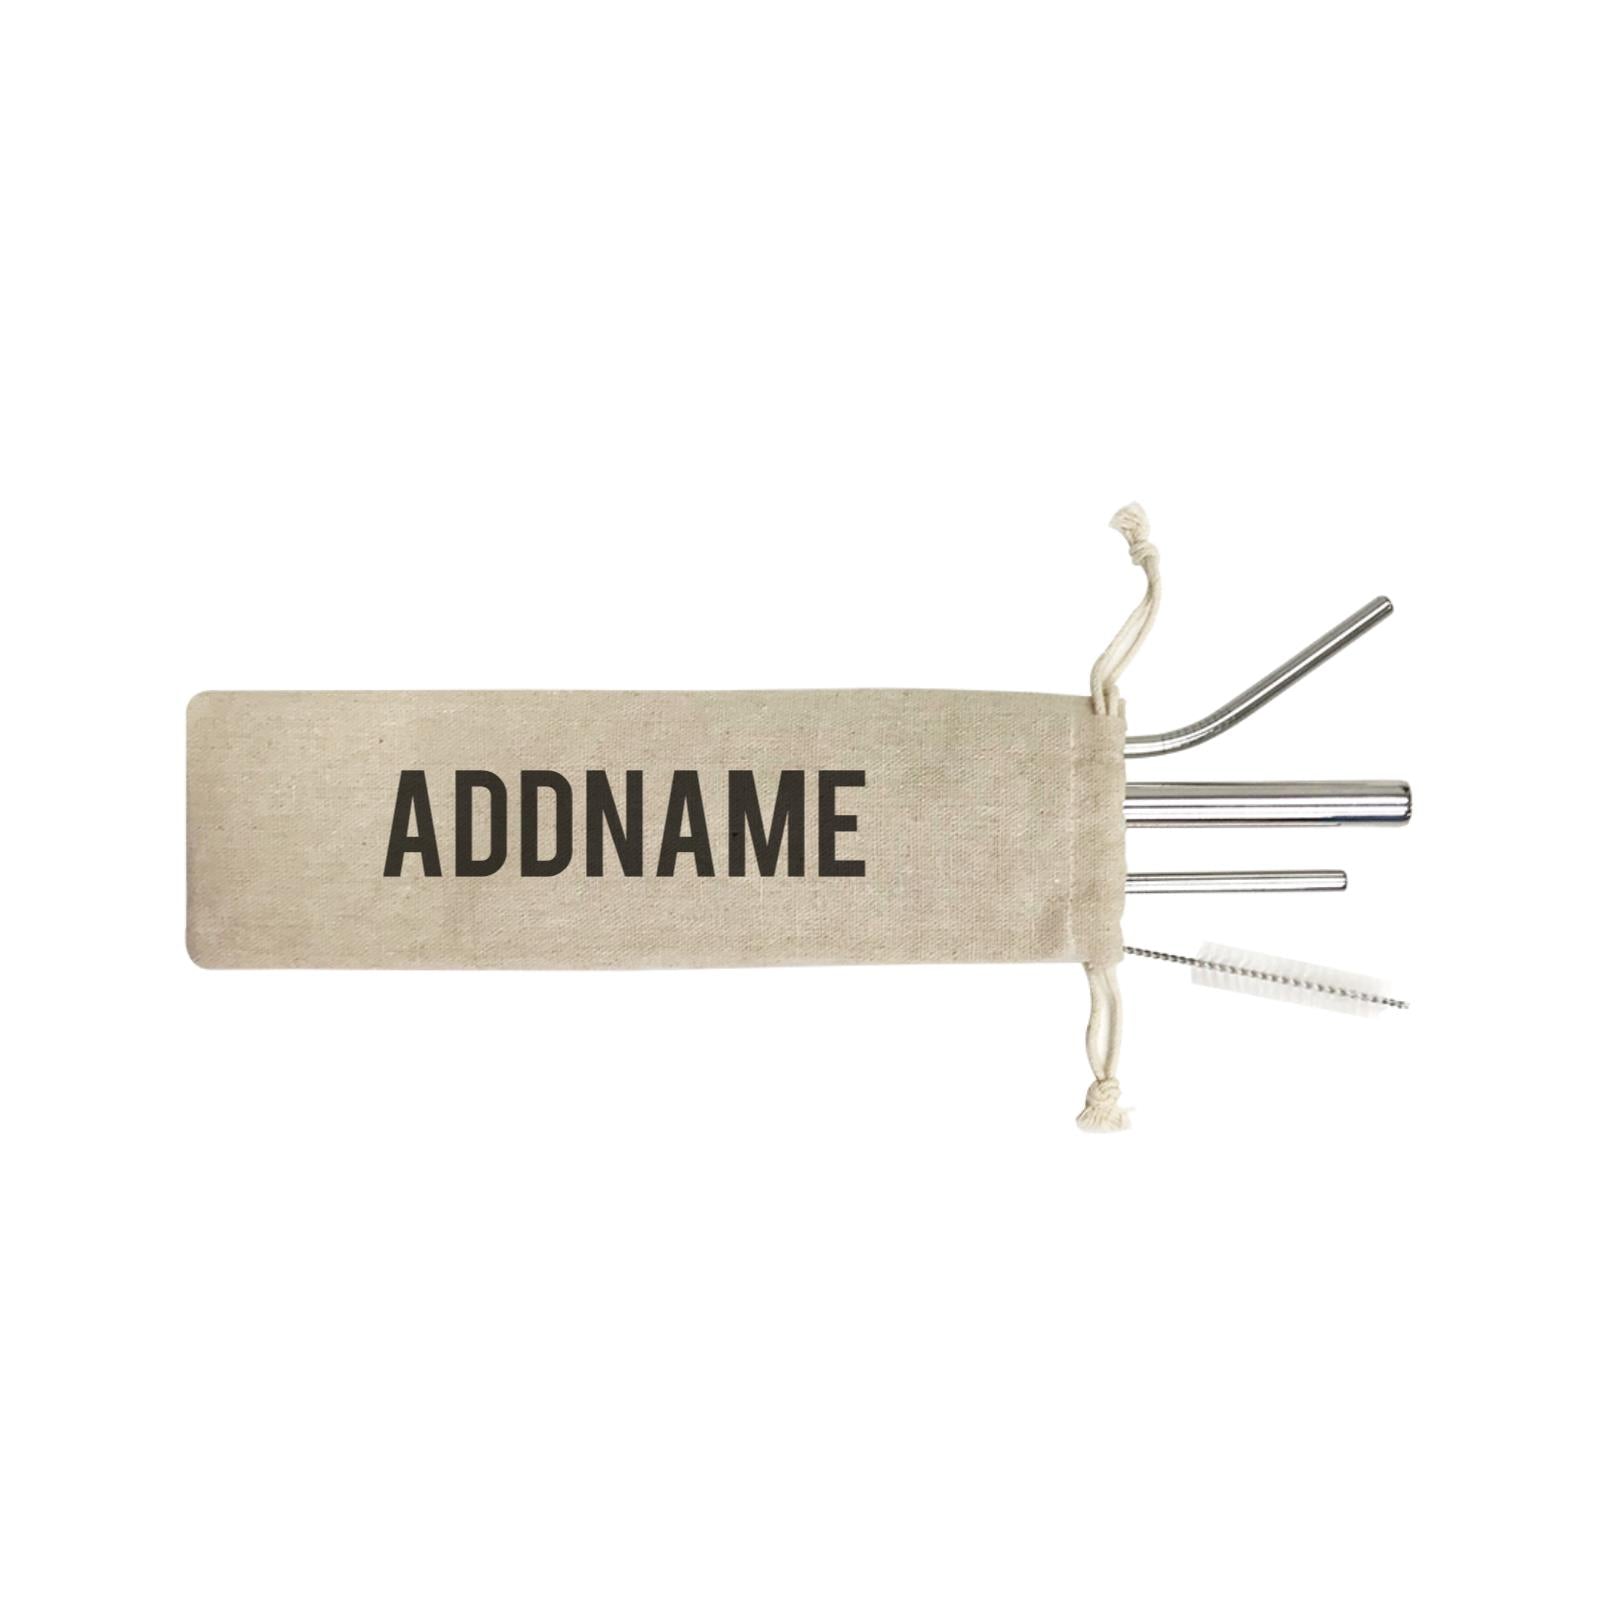 Addname SB 4-In-1 Stainless Steel Straw Set in Satchel